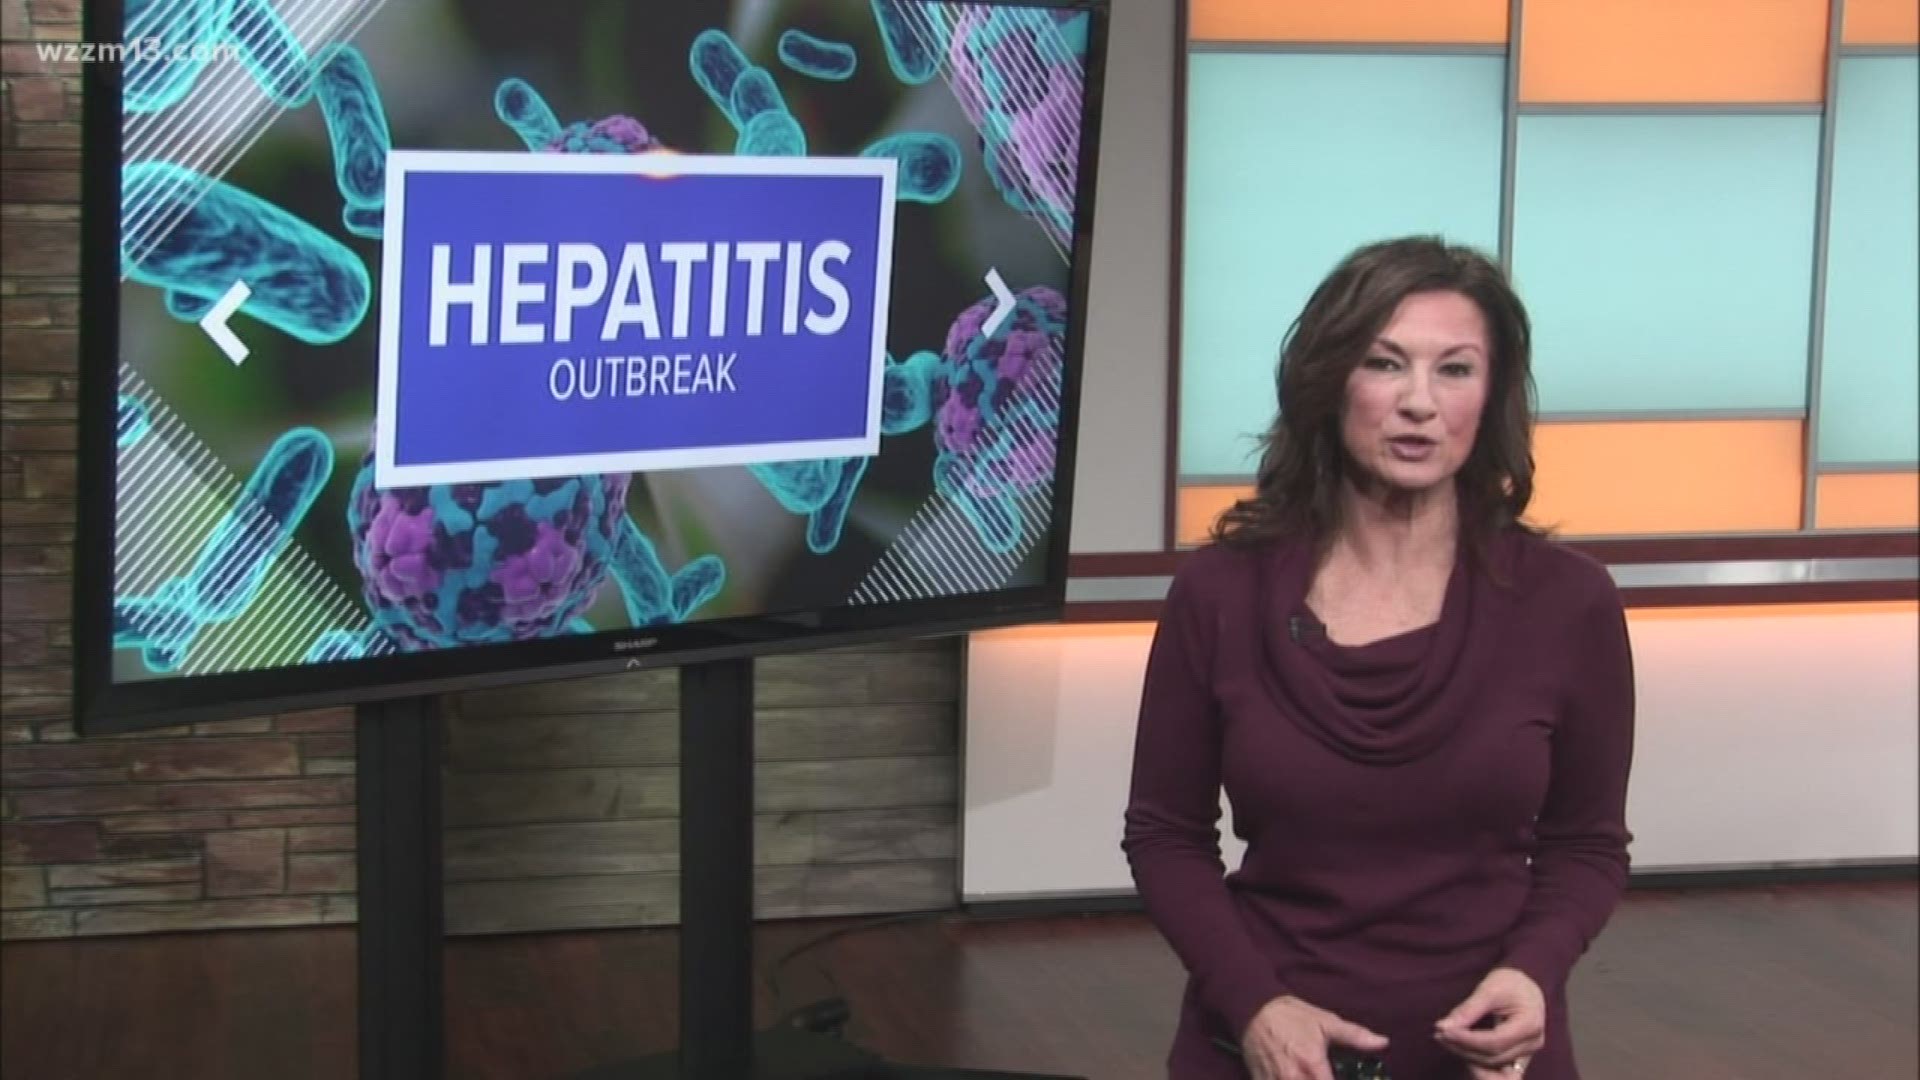 Kent County now considered part of hepatitis A outbreak